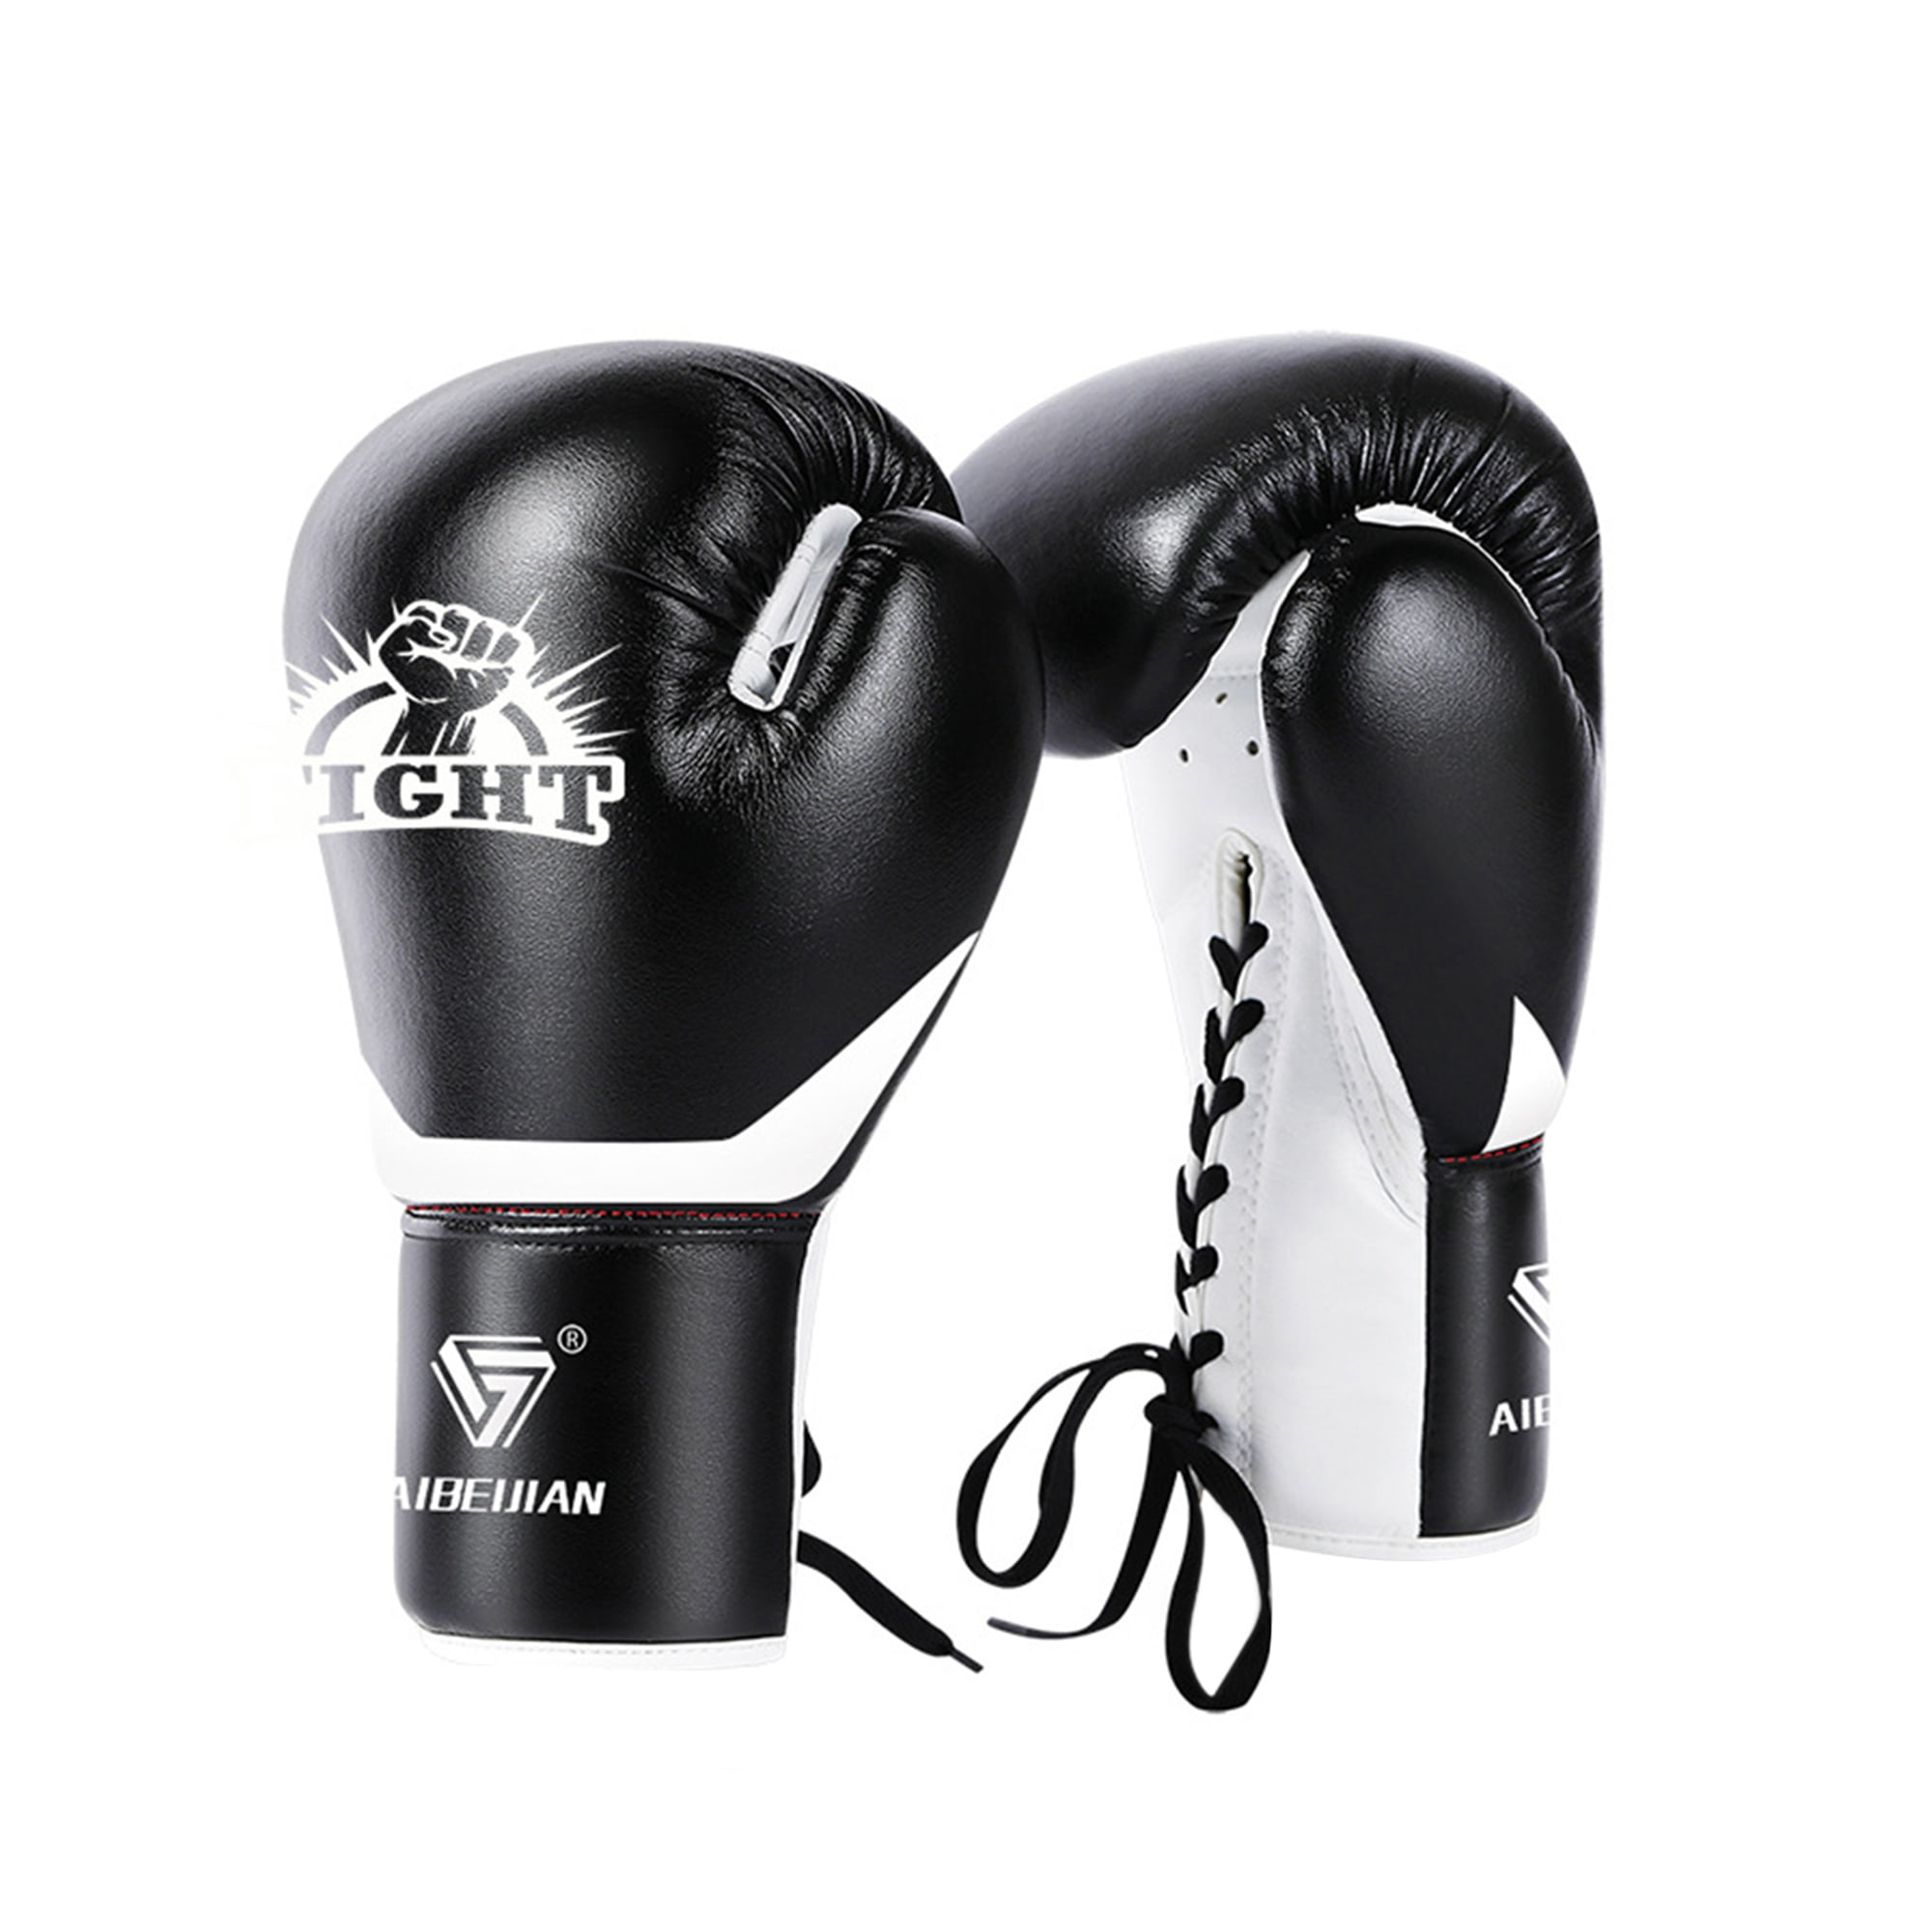 MMA Muay Thai Training Punching Bag Half Mitts Sparring Boxing Gloves Black US 